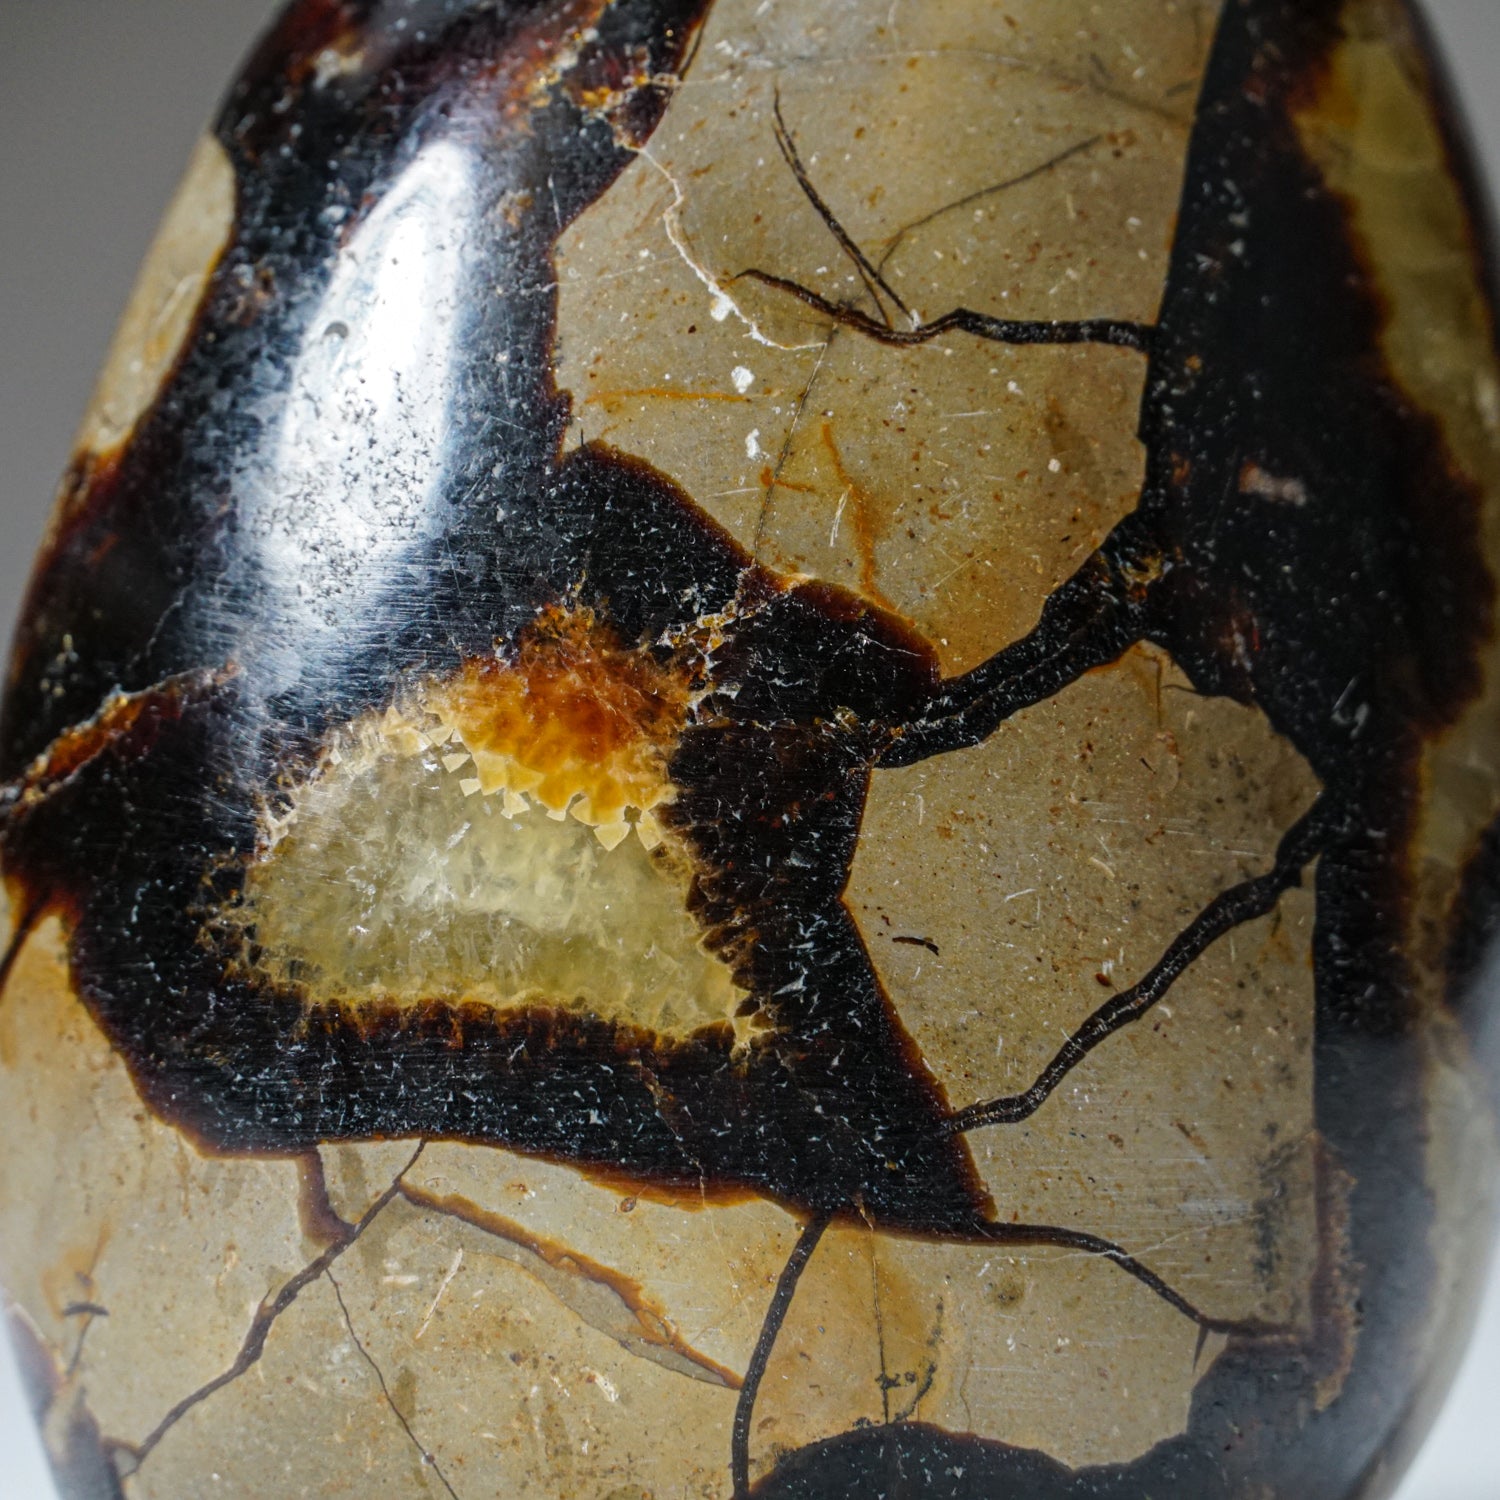 Polished Septarian Freeform from Madagascar (1 lbs)